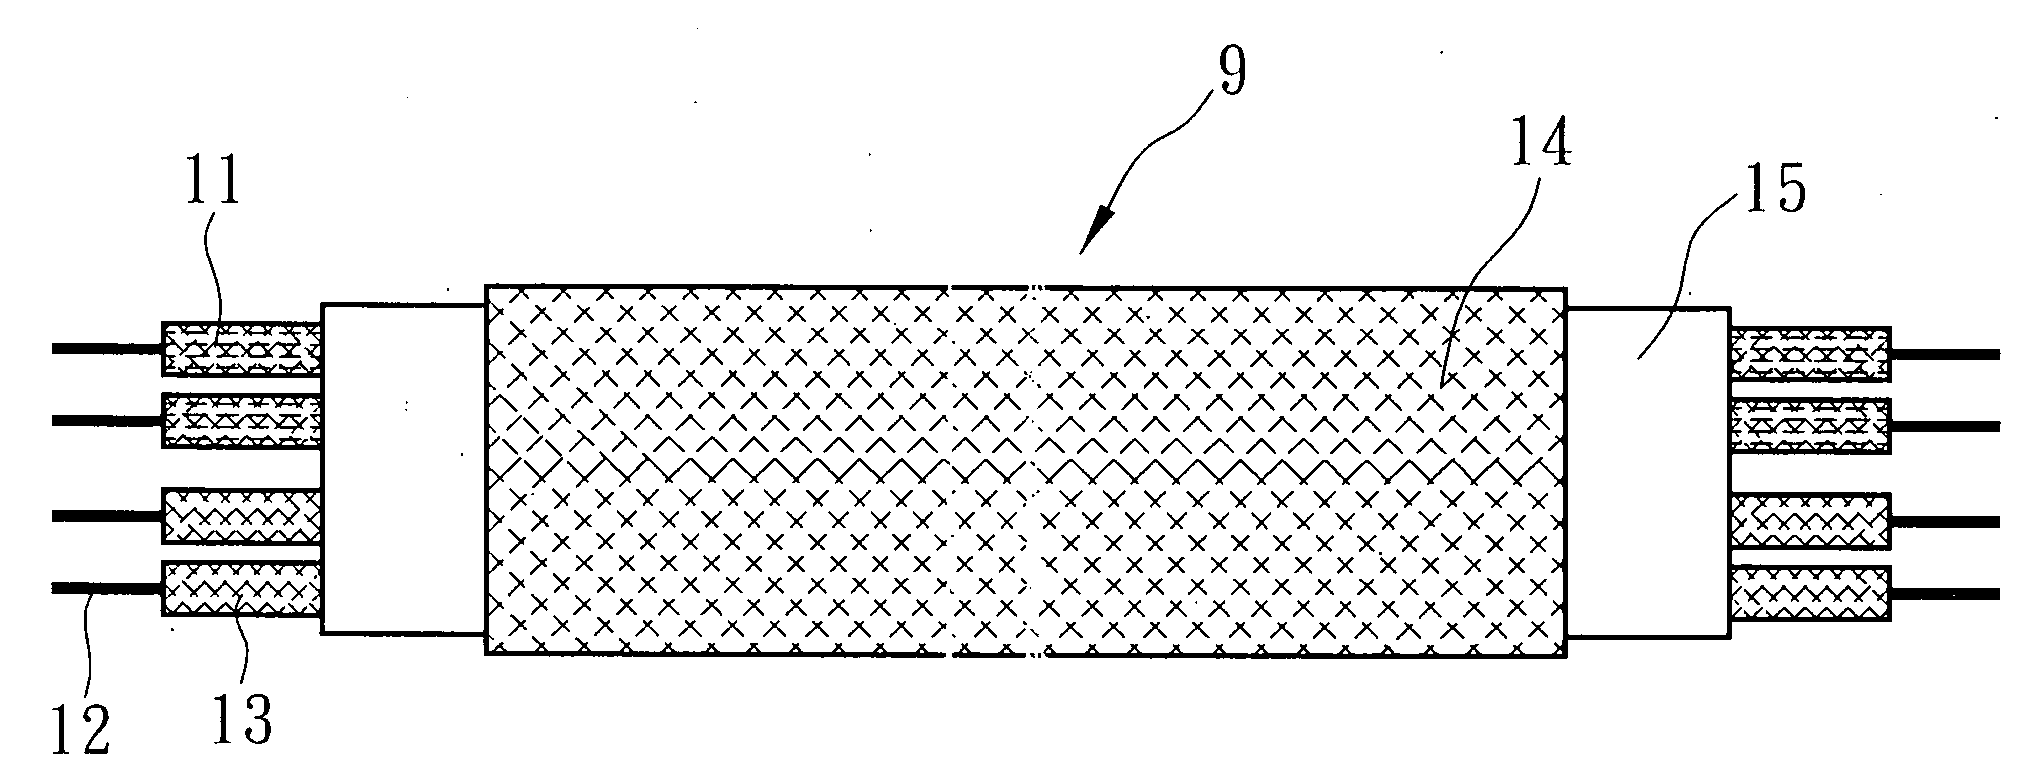 Multiple temperature resistance characteristic sensing cable and its sensor